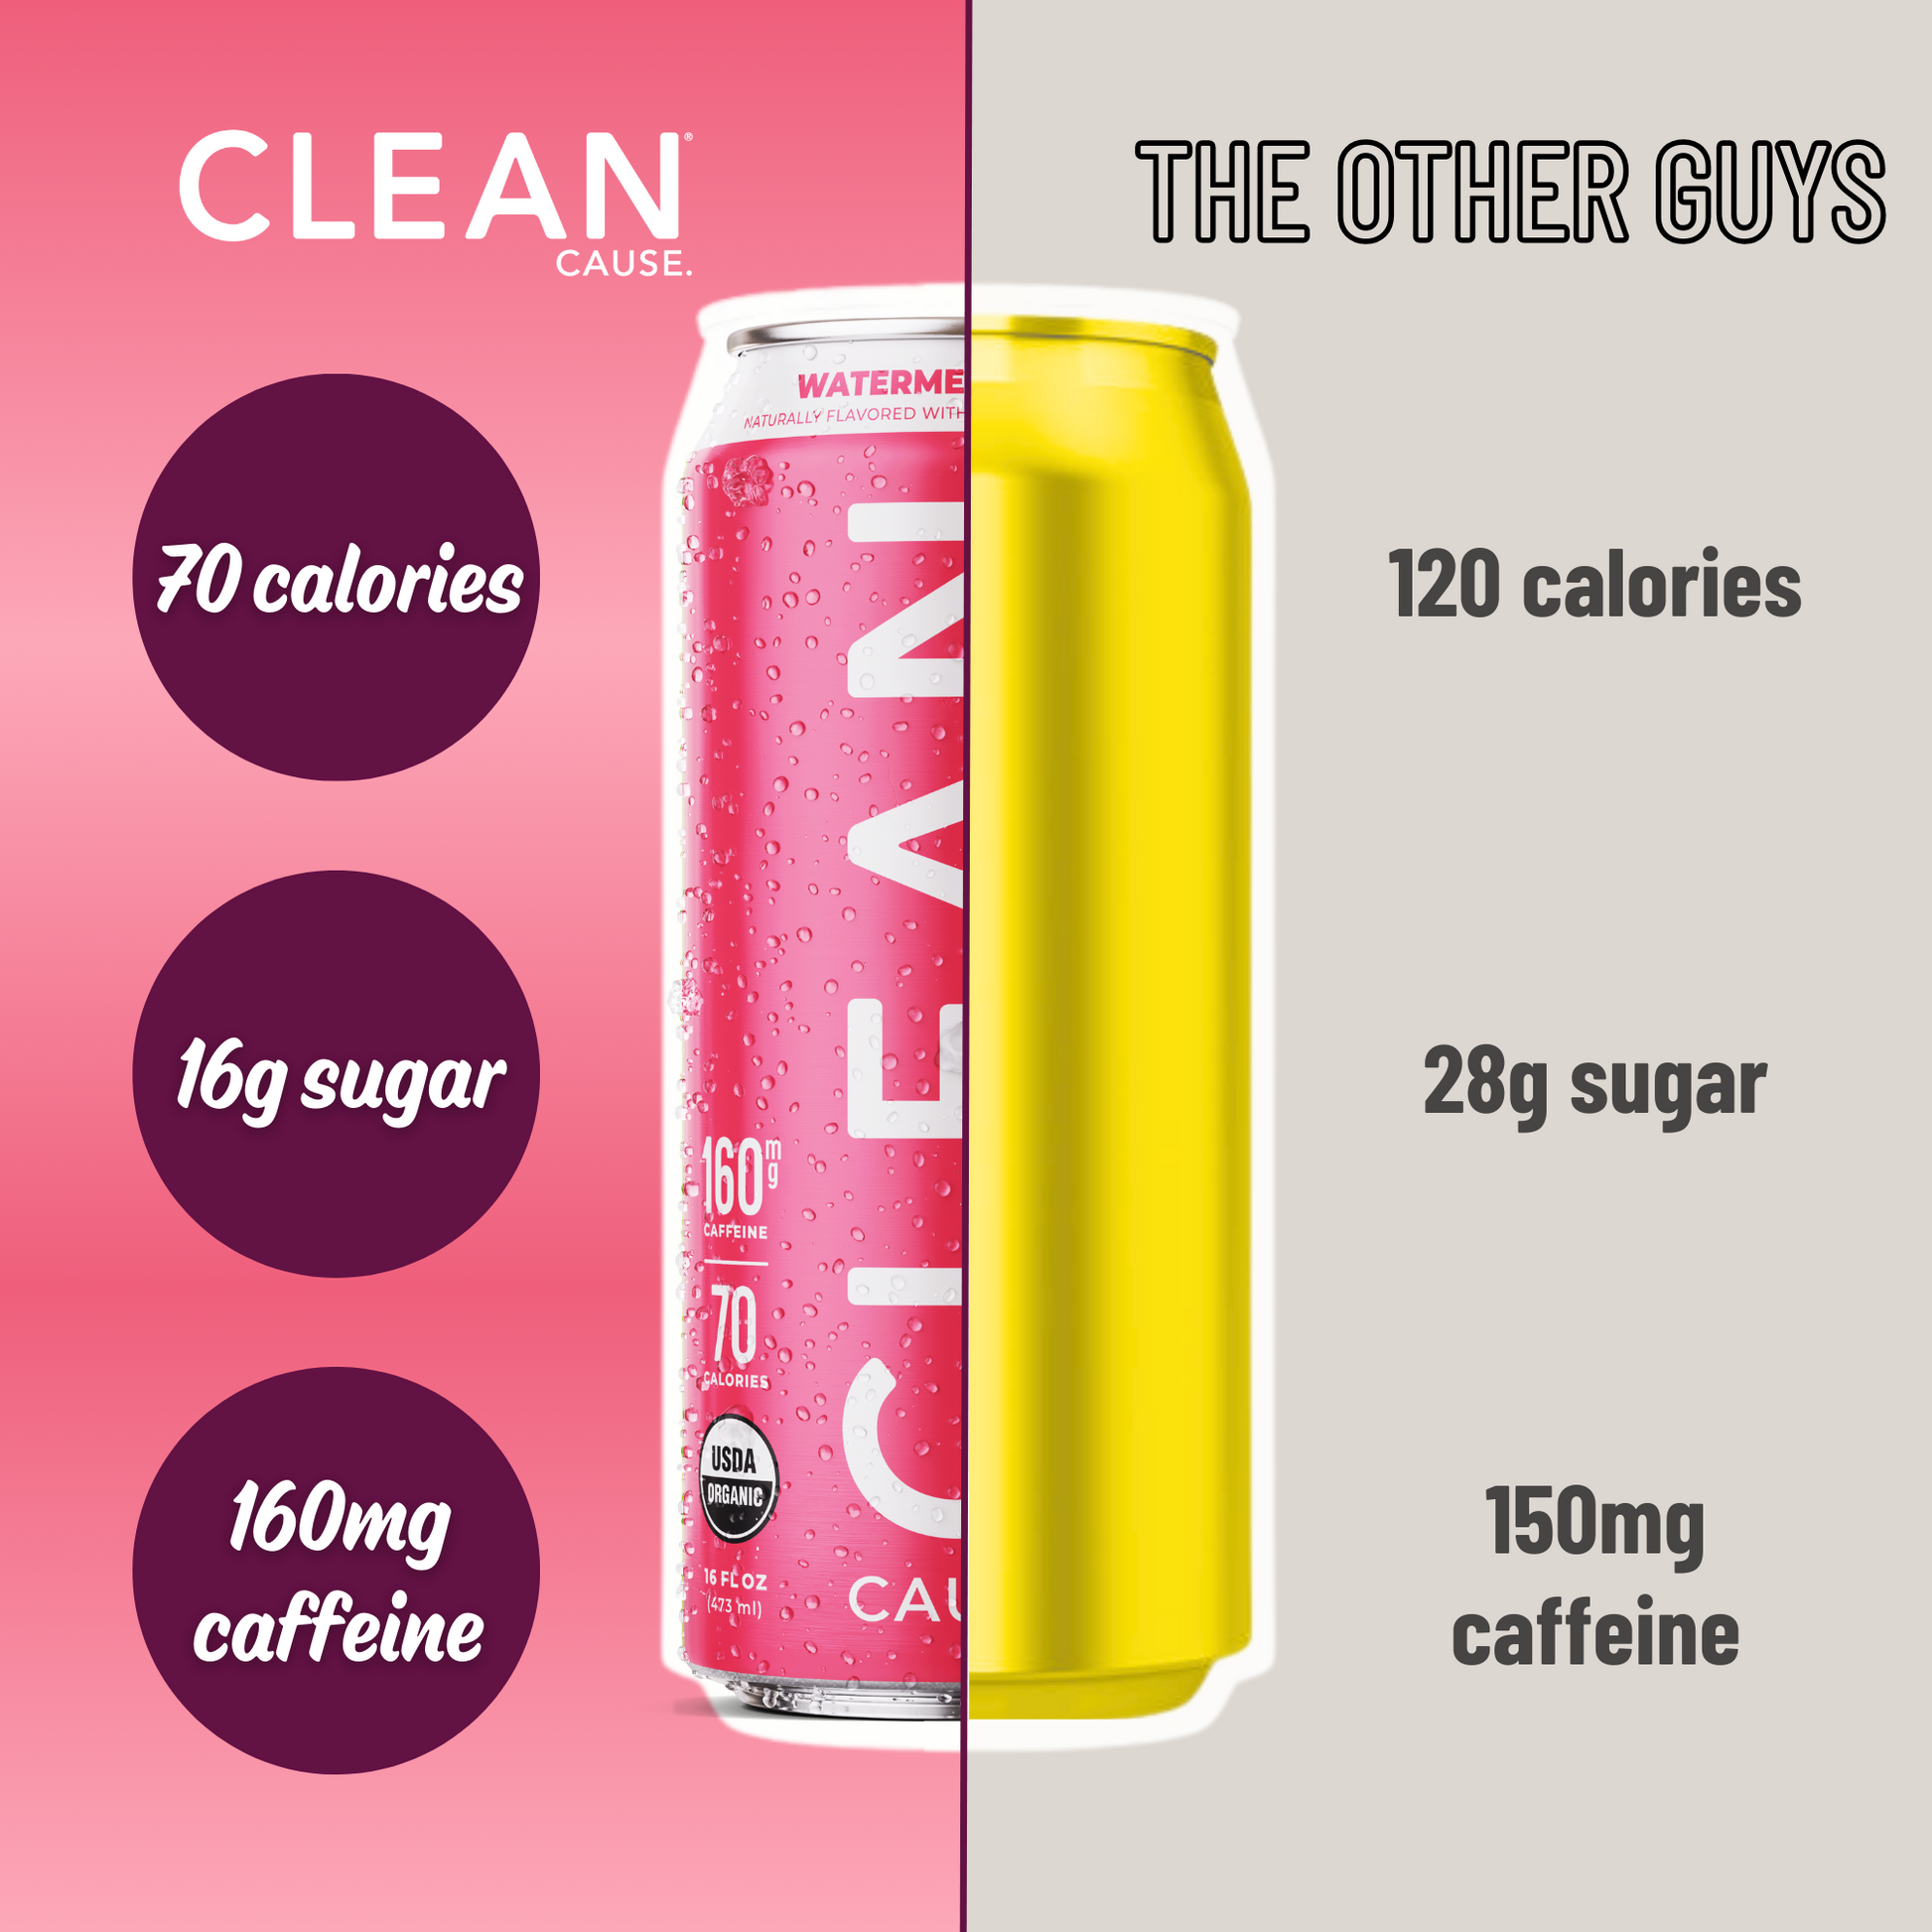 A can split between CLEAN Watermelon Mint Yerba Mate and "The Other Guys" showing CLEAN with 70 calories, 16g sugar, and 160mg caffeine and the other guys with 120 calories, 28g sugar, and 150mg caffeine